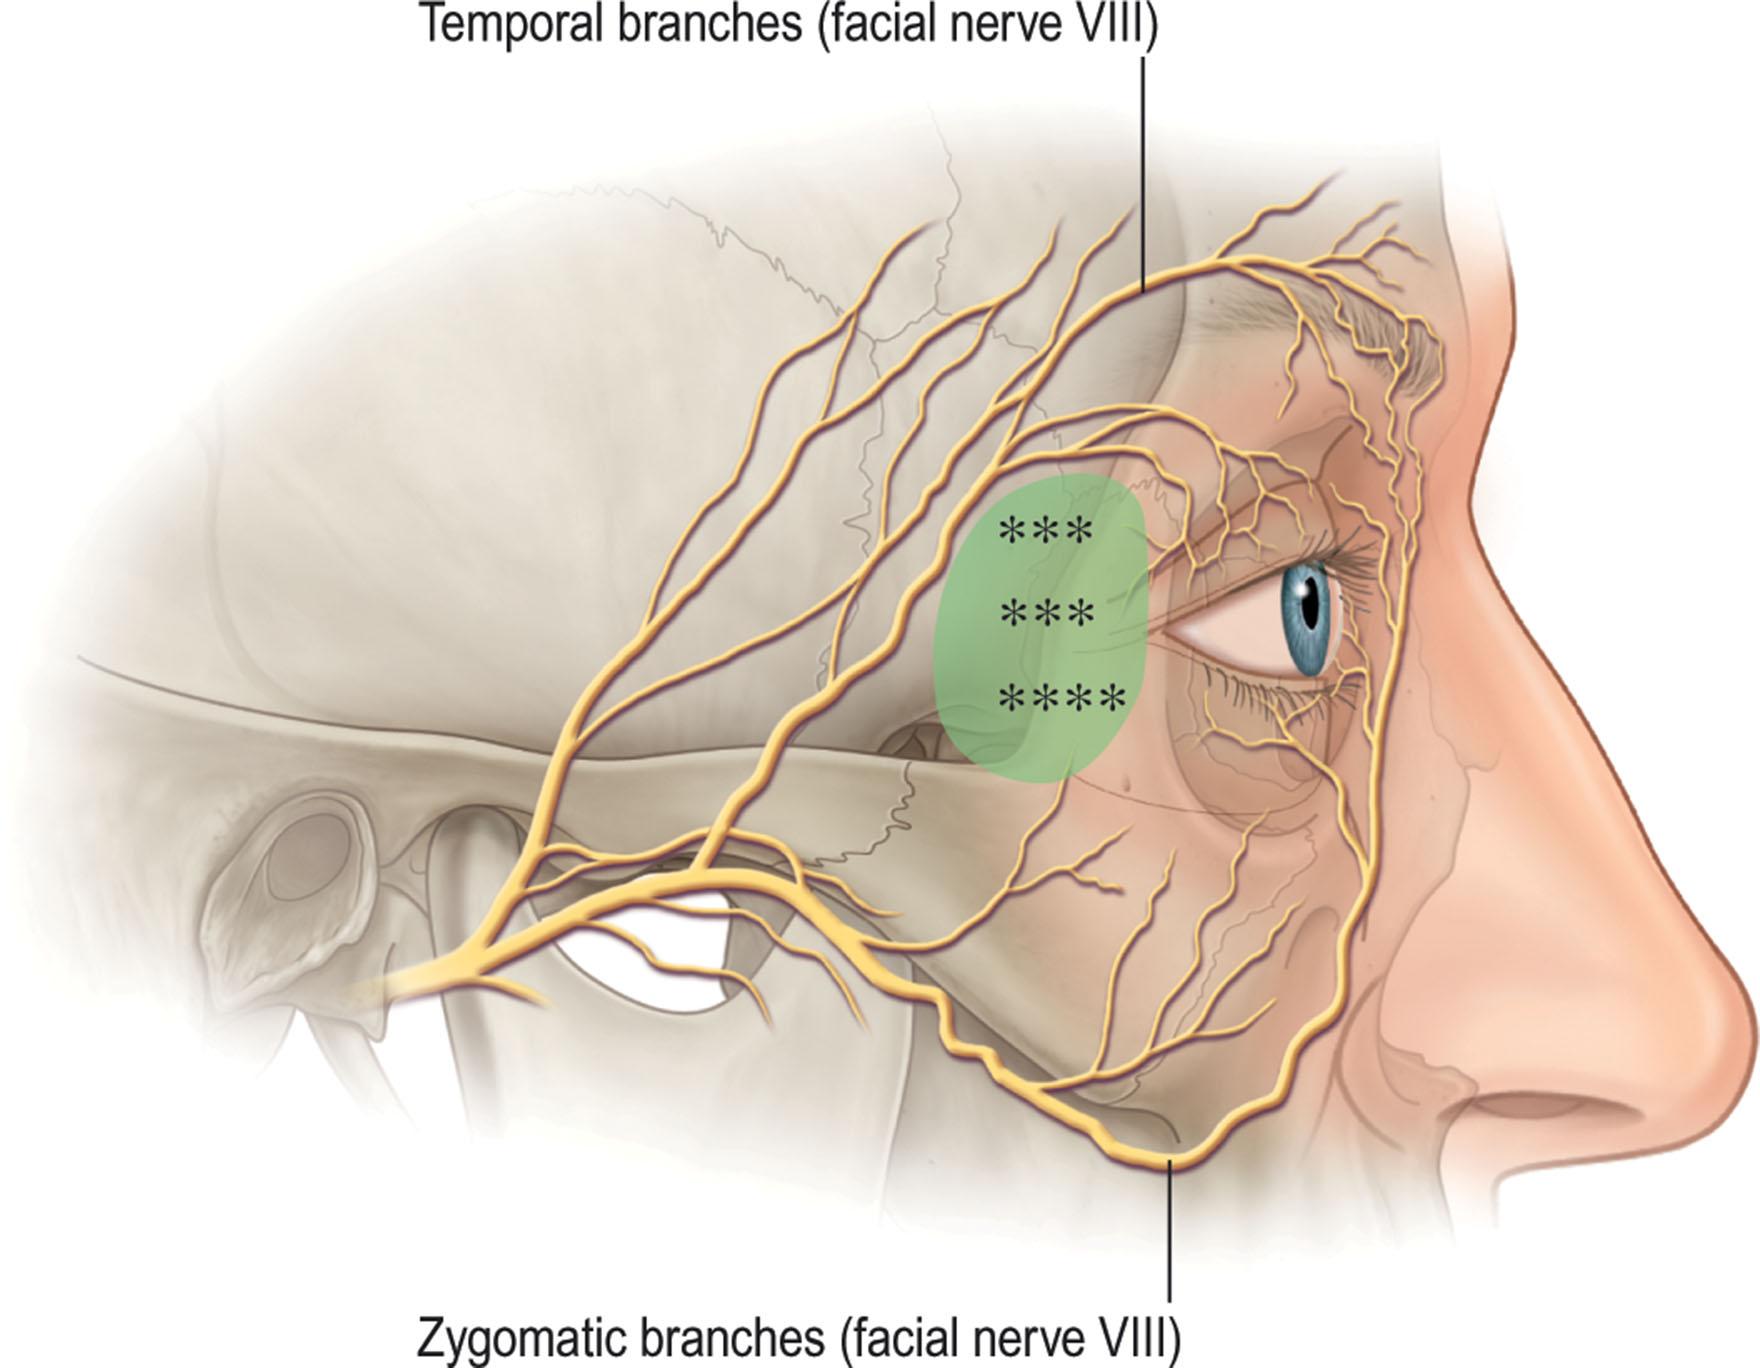 Figure 13.16, Anatomy of the brow and temporal region. The light green opaque area denotes the deep temporal fascia and the periosteum where sutures may be used to suspend soft tissue. Wide undermining, soft-tissue suspension, and canthopexy are safely performed here.